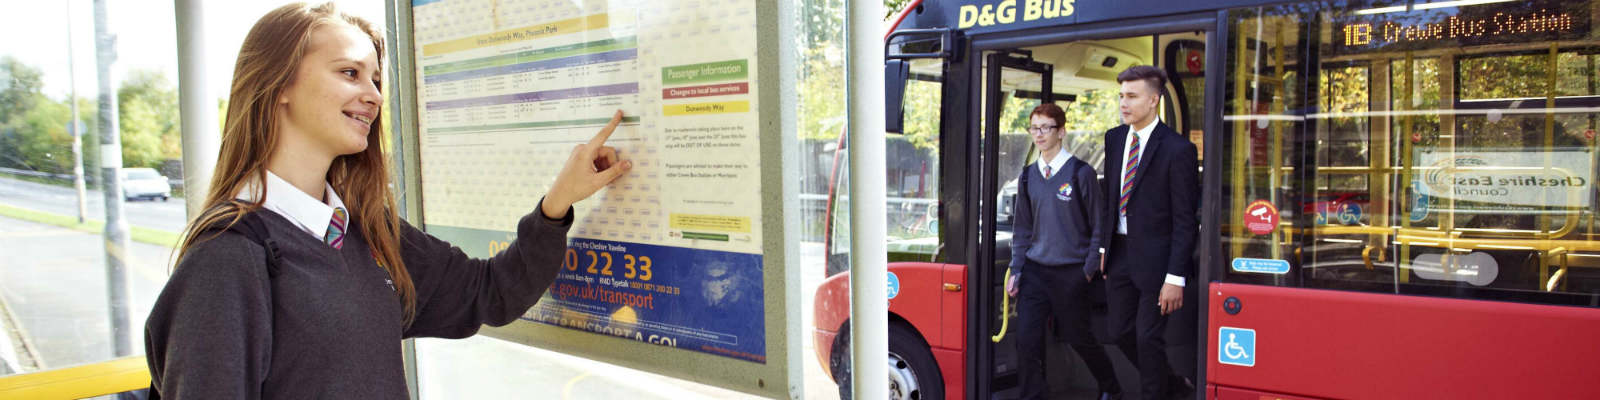 A school girl looks at a bus timetable